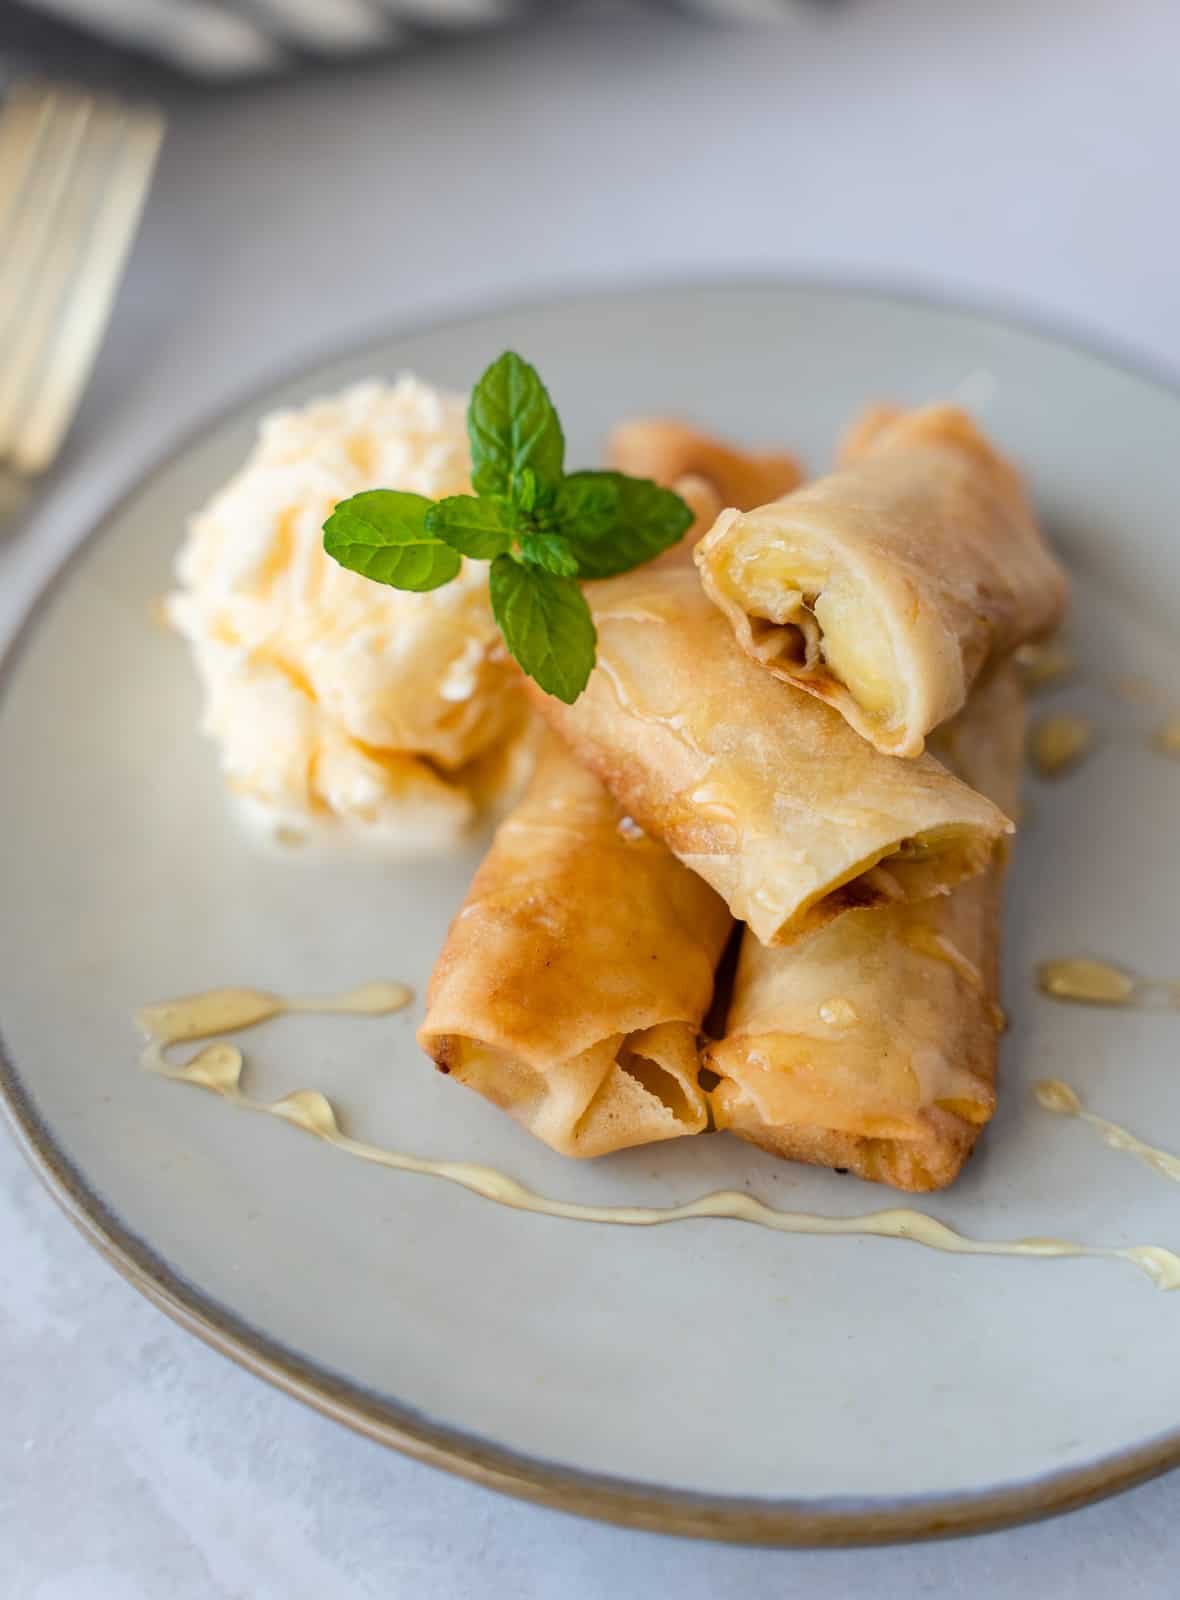 Banana spring rolls on a plate with ice cream and a mint sprig.